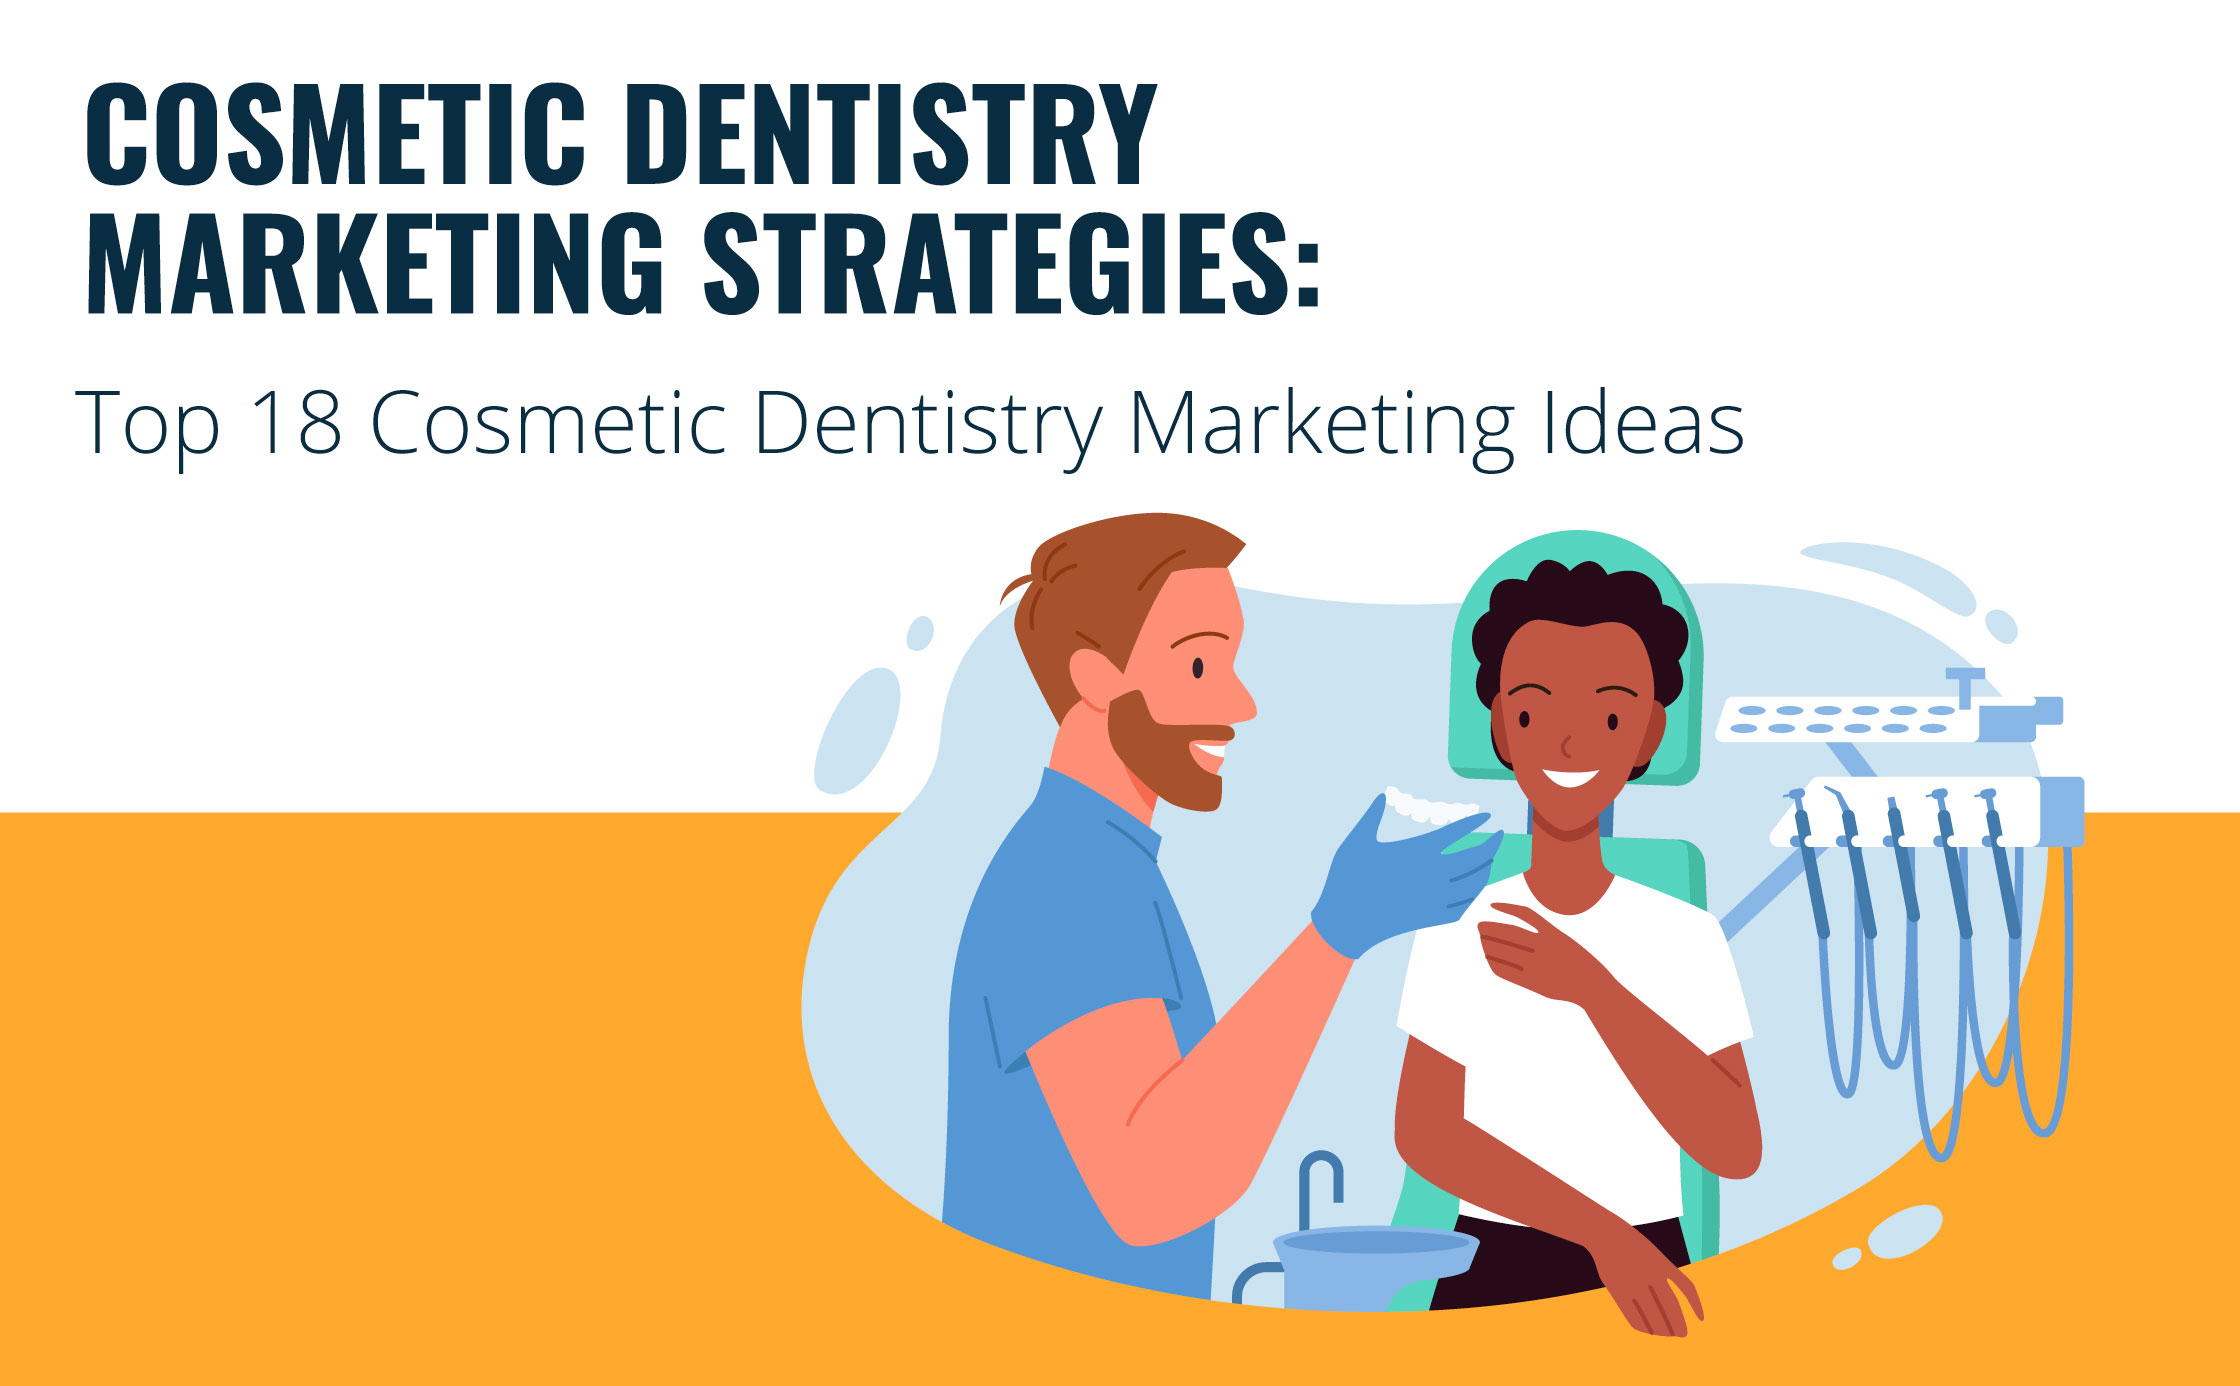 Top 18 Cosmetic Dentistry Marketing Ideas